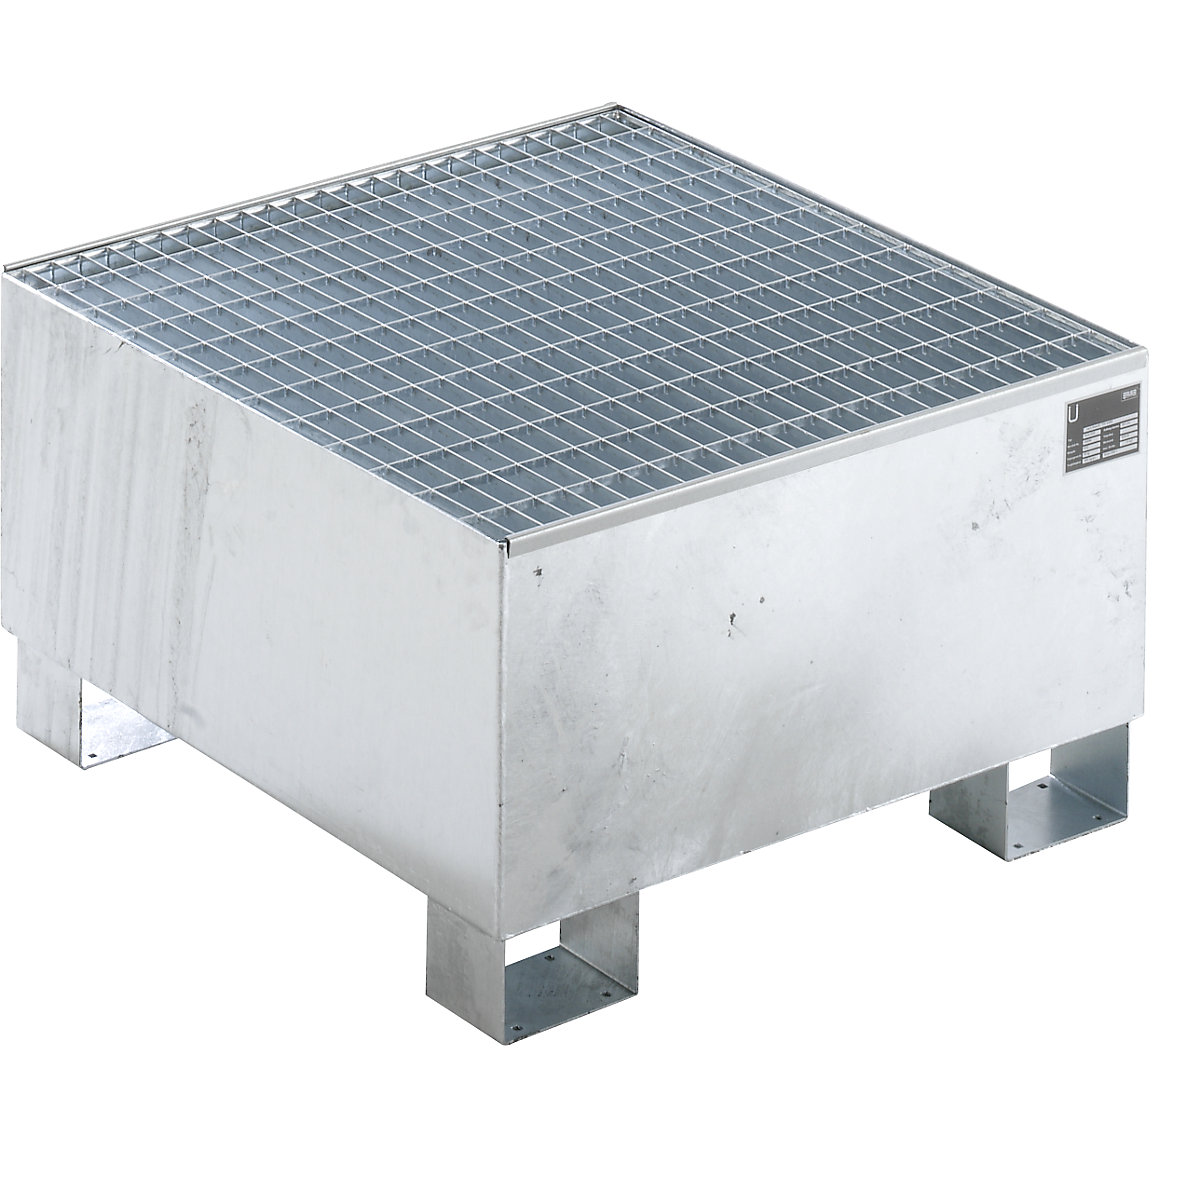 Sump tray made from sheet steel, LxWxH 800 x 800 x 465 mm, hot dip galvanised, with grate